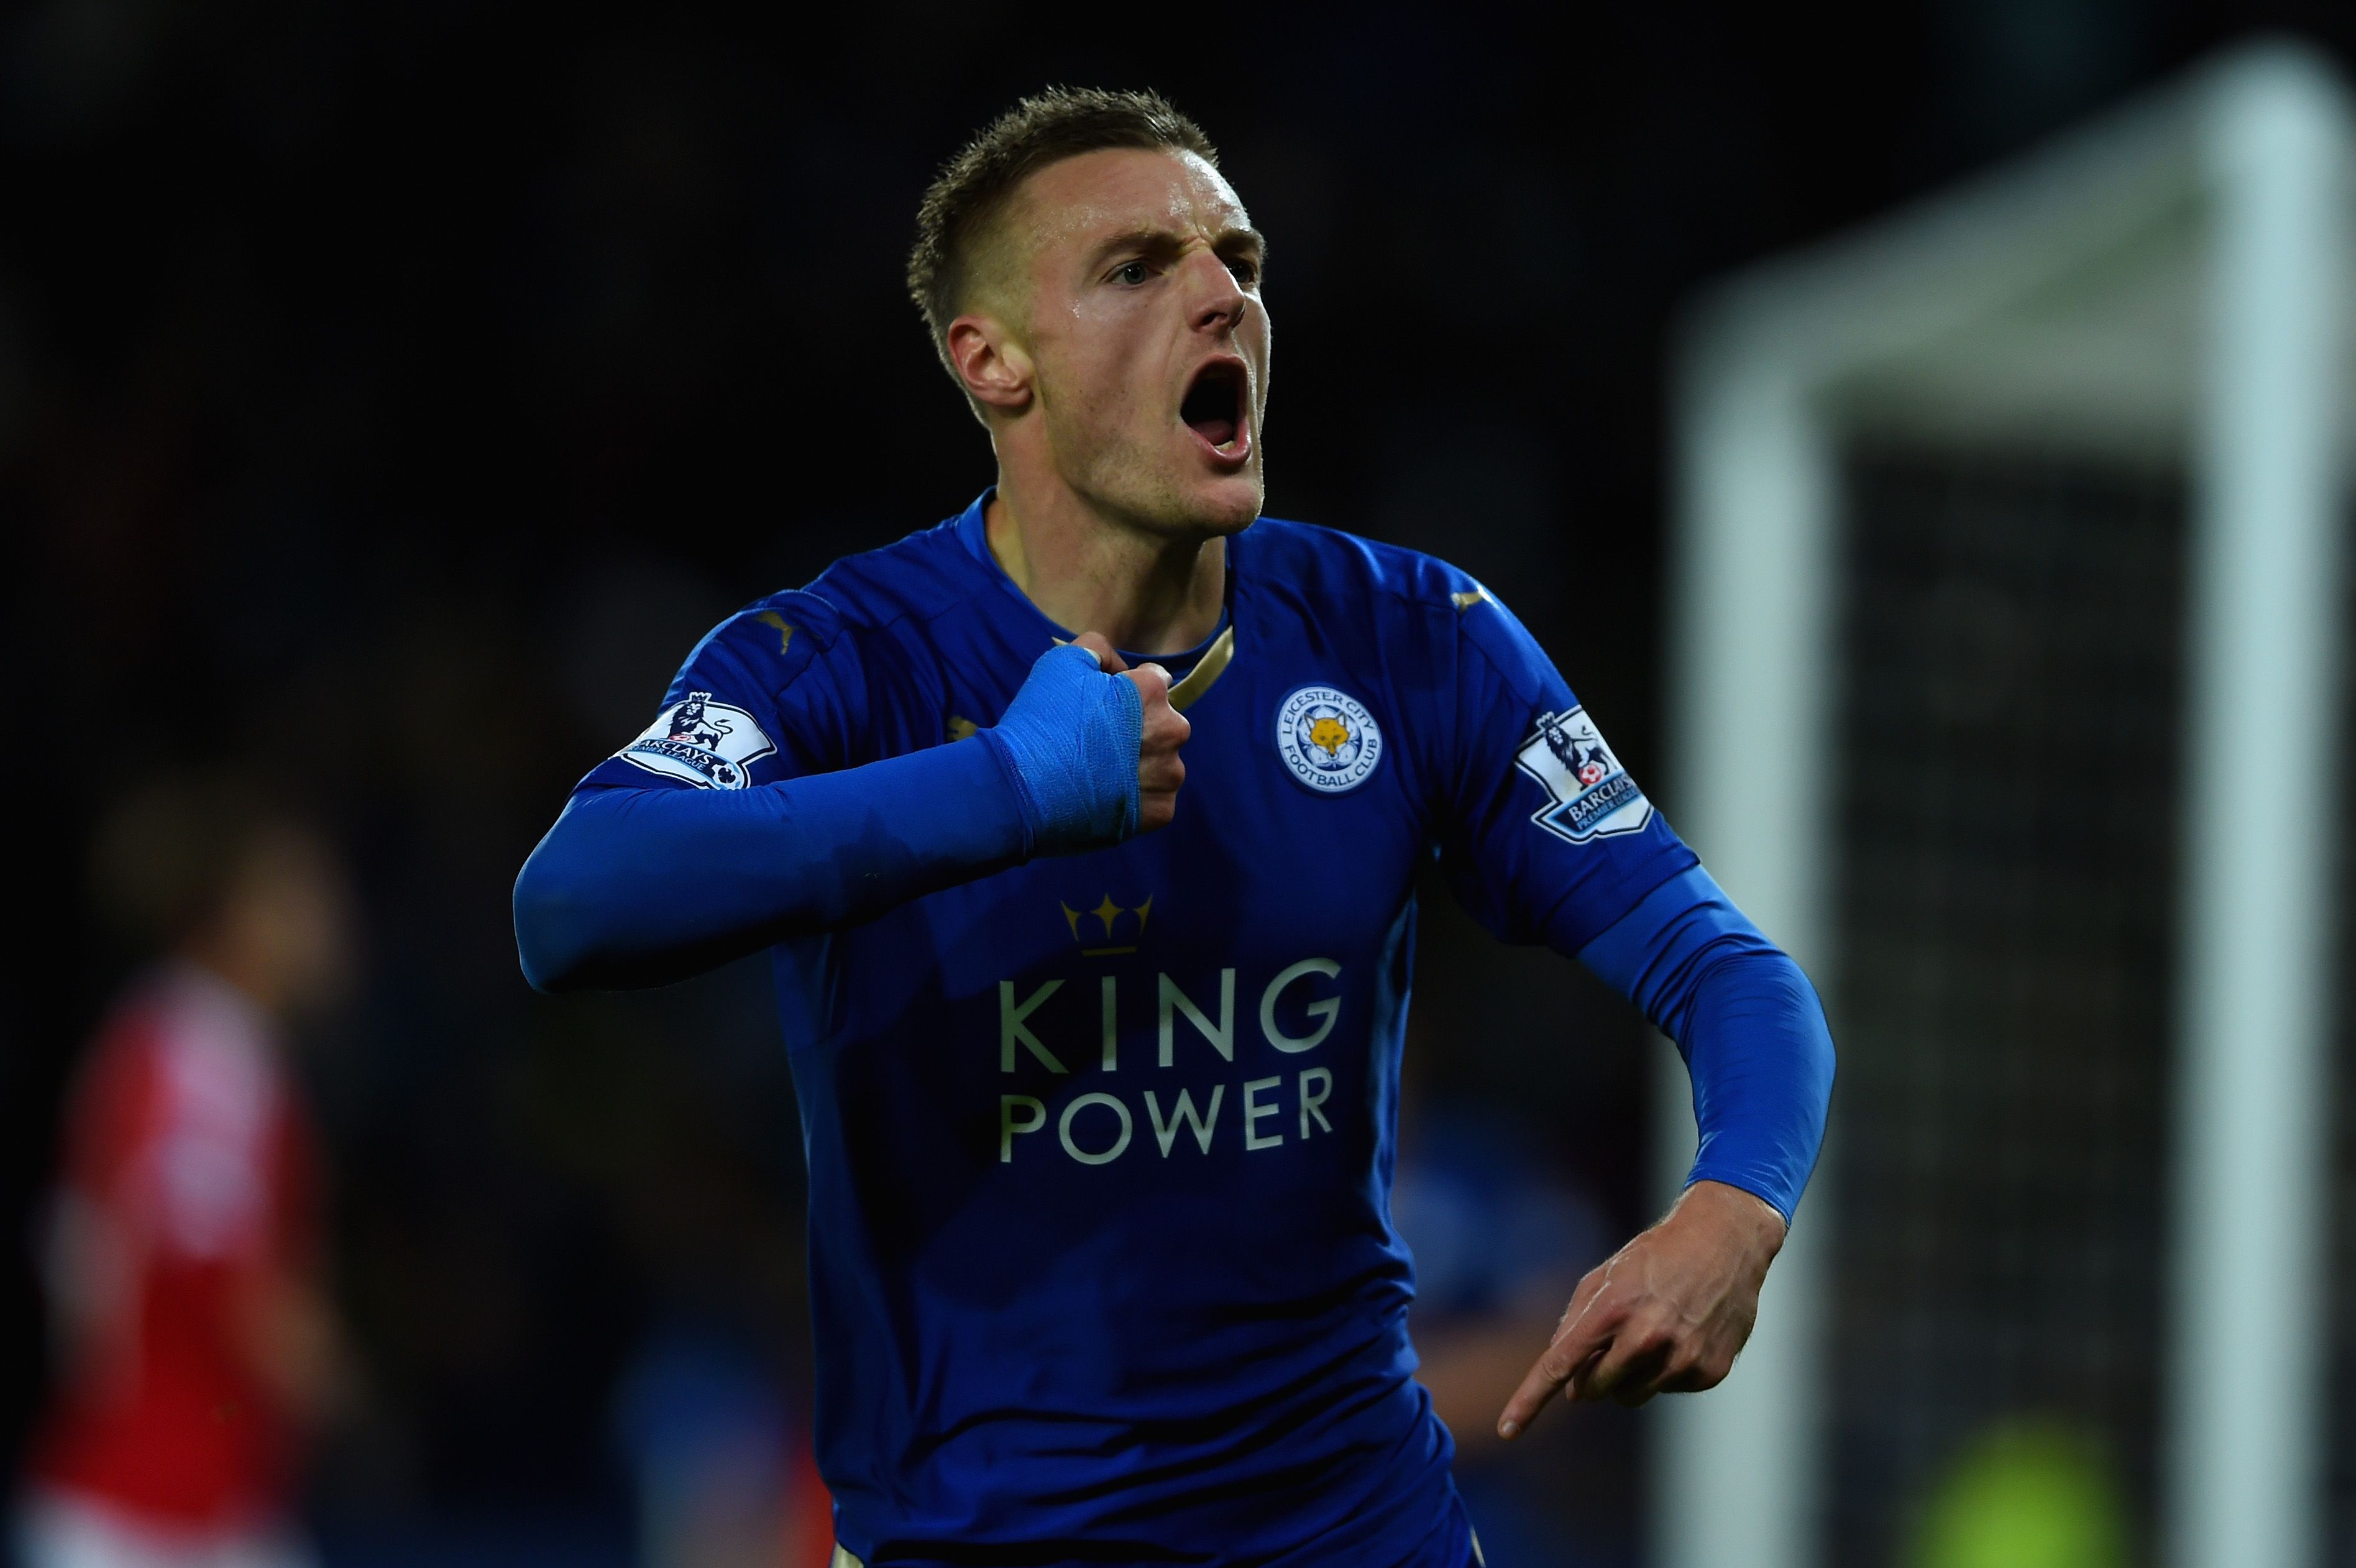 Leicester City striker Jamie Vardy shows off £50,000 watch and